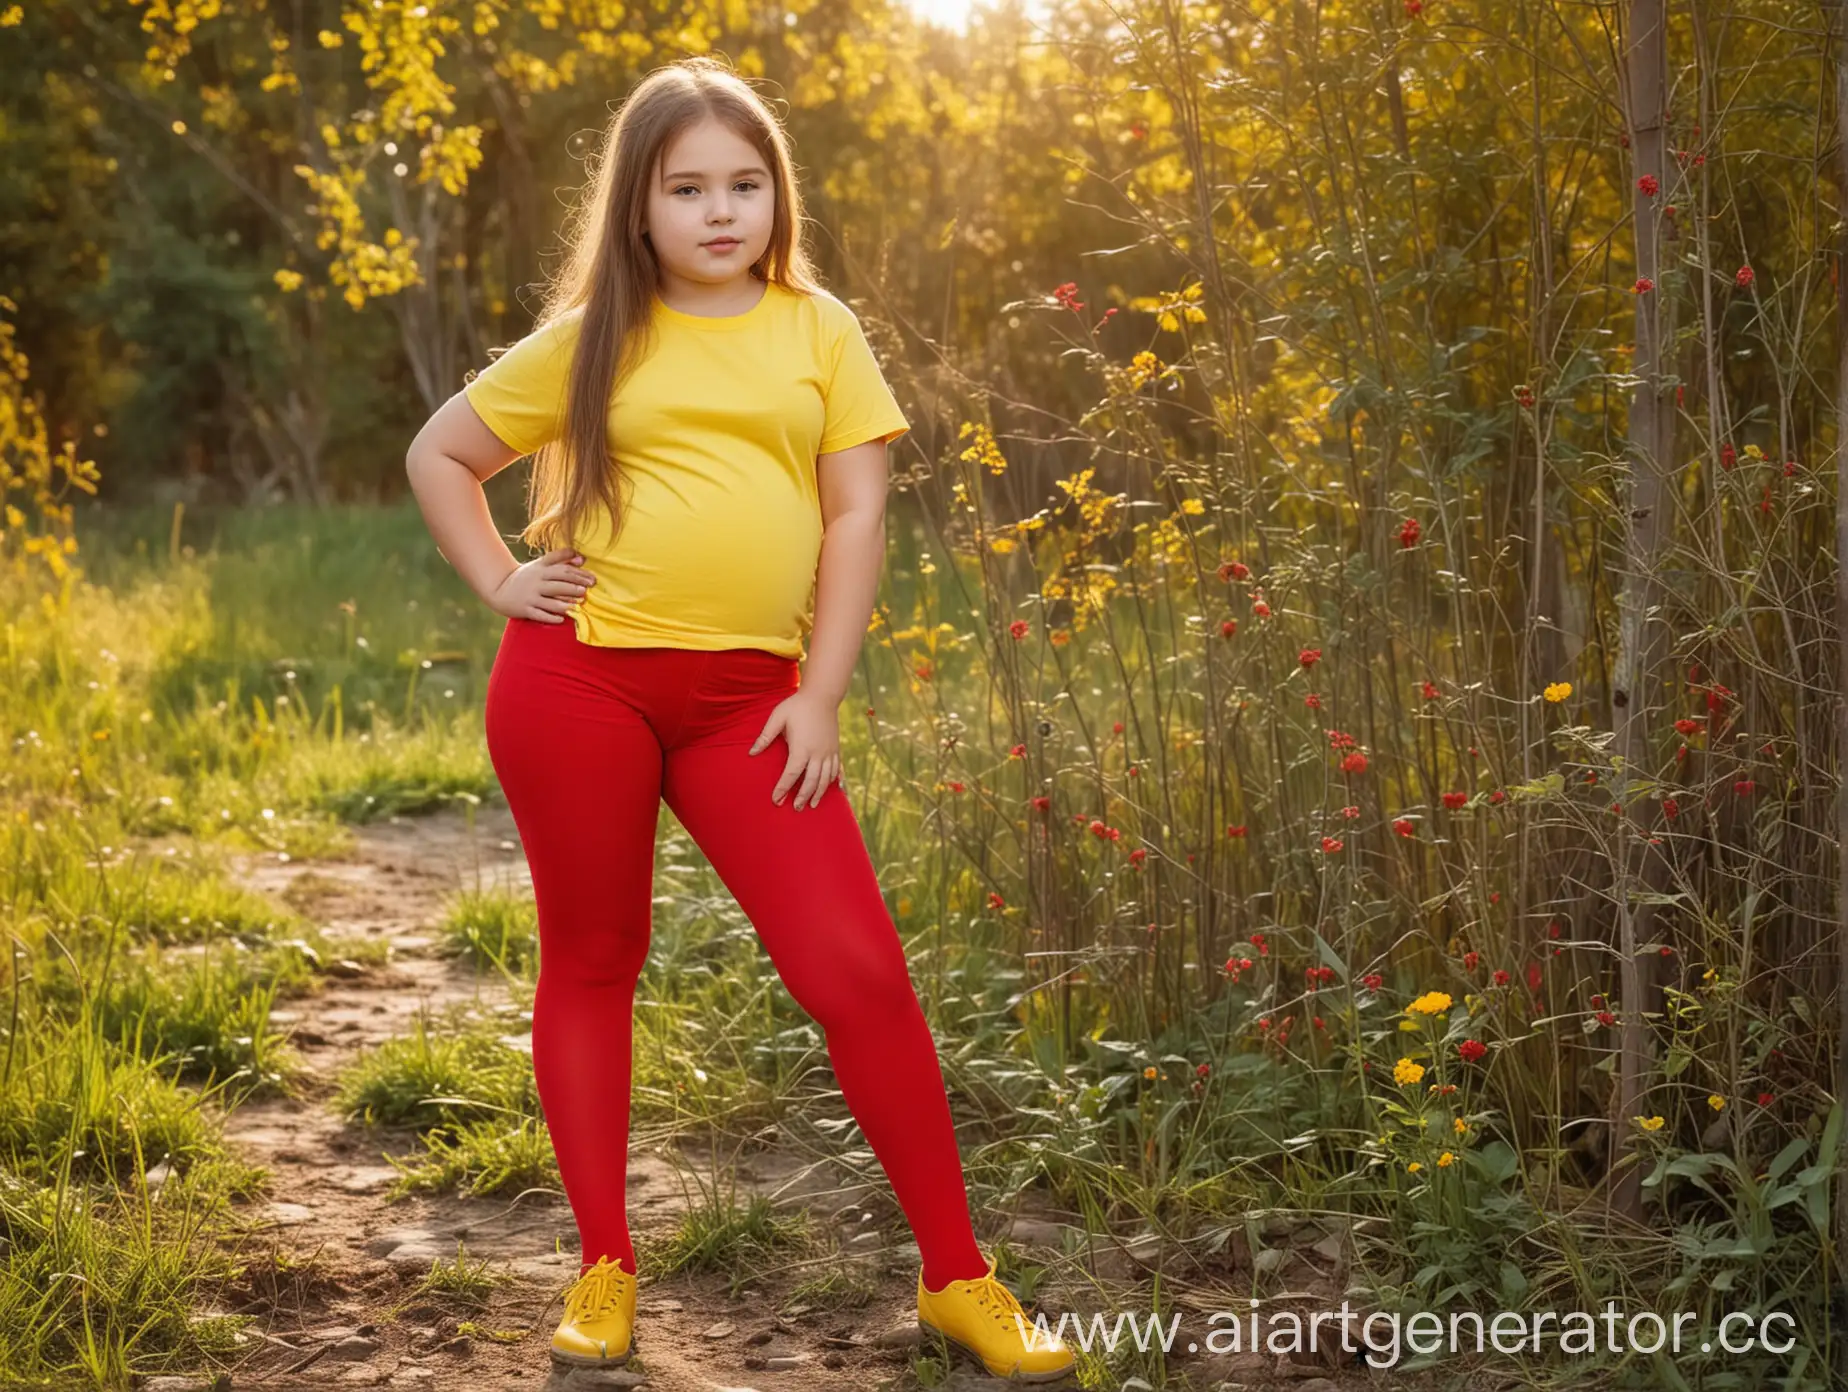 Plump-Preteen-Girl-in-Red-Denim-Shorts-and-Tights-Standing-in-Nature